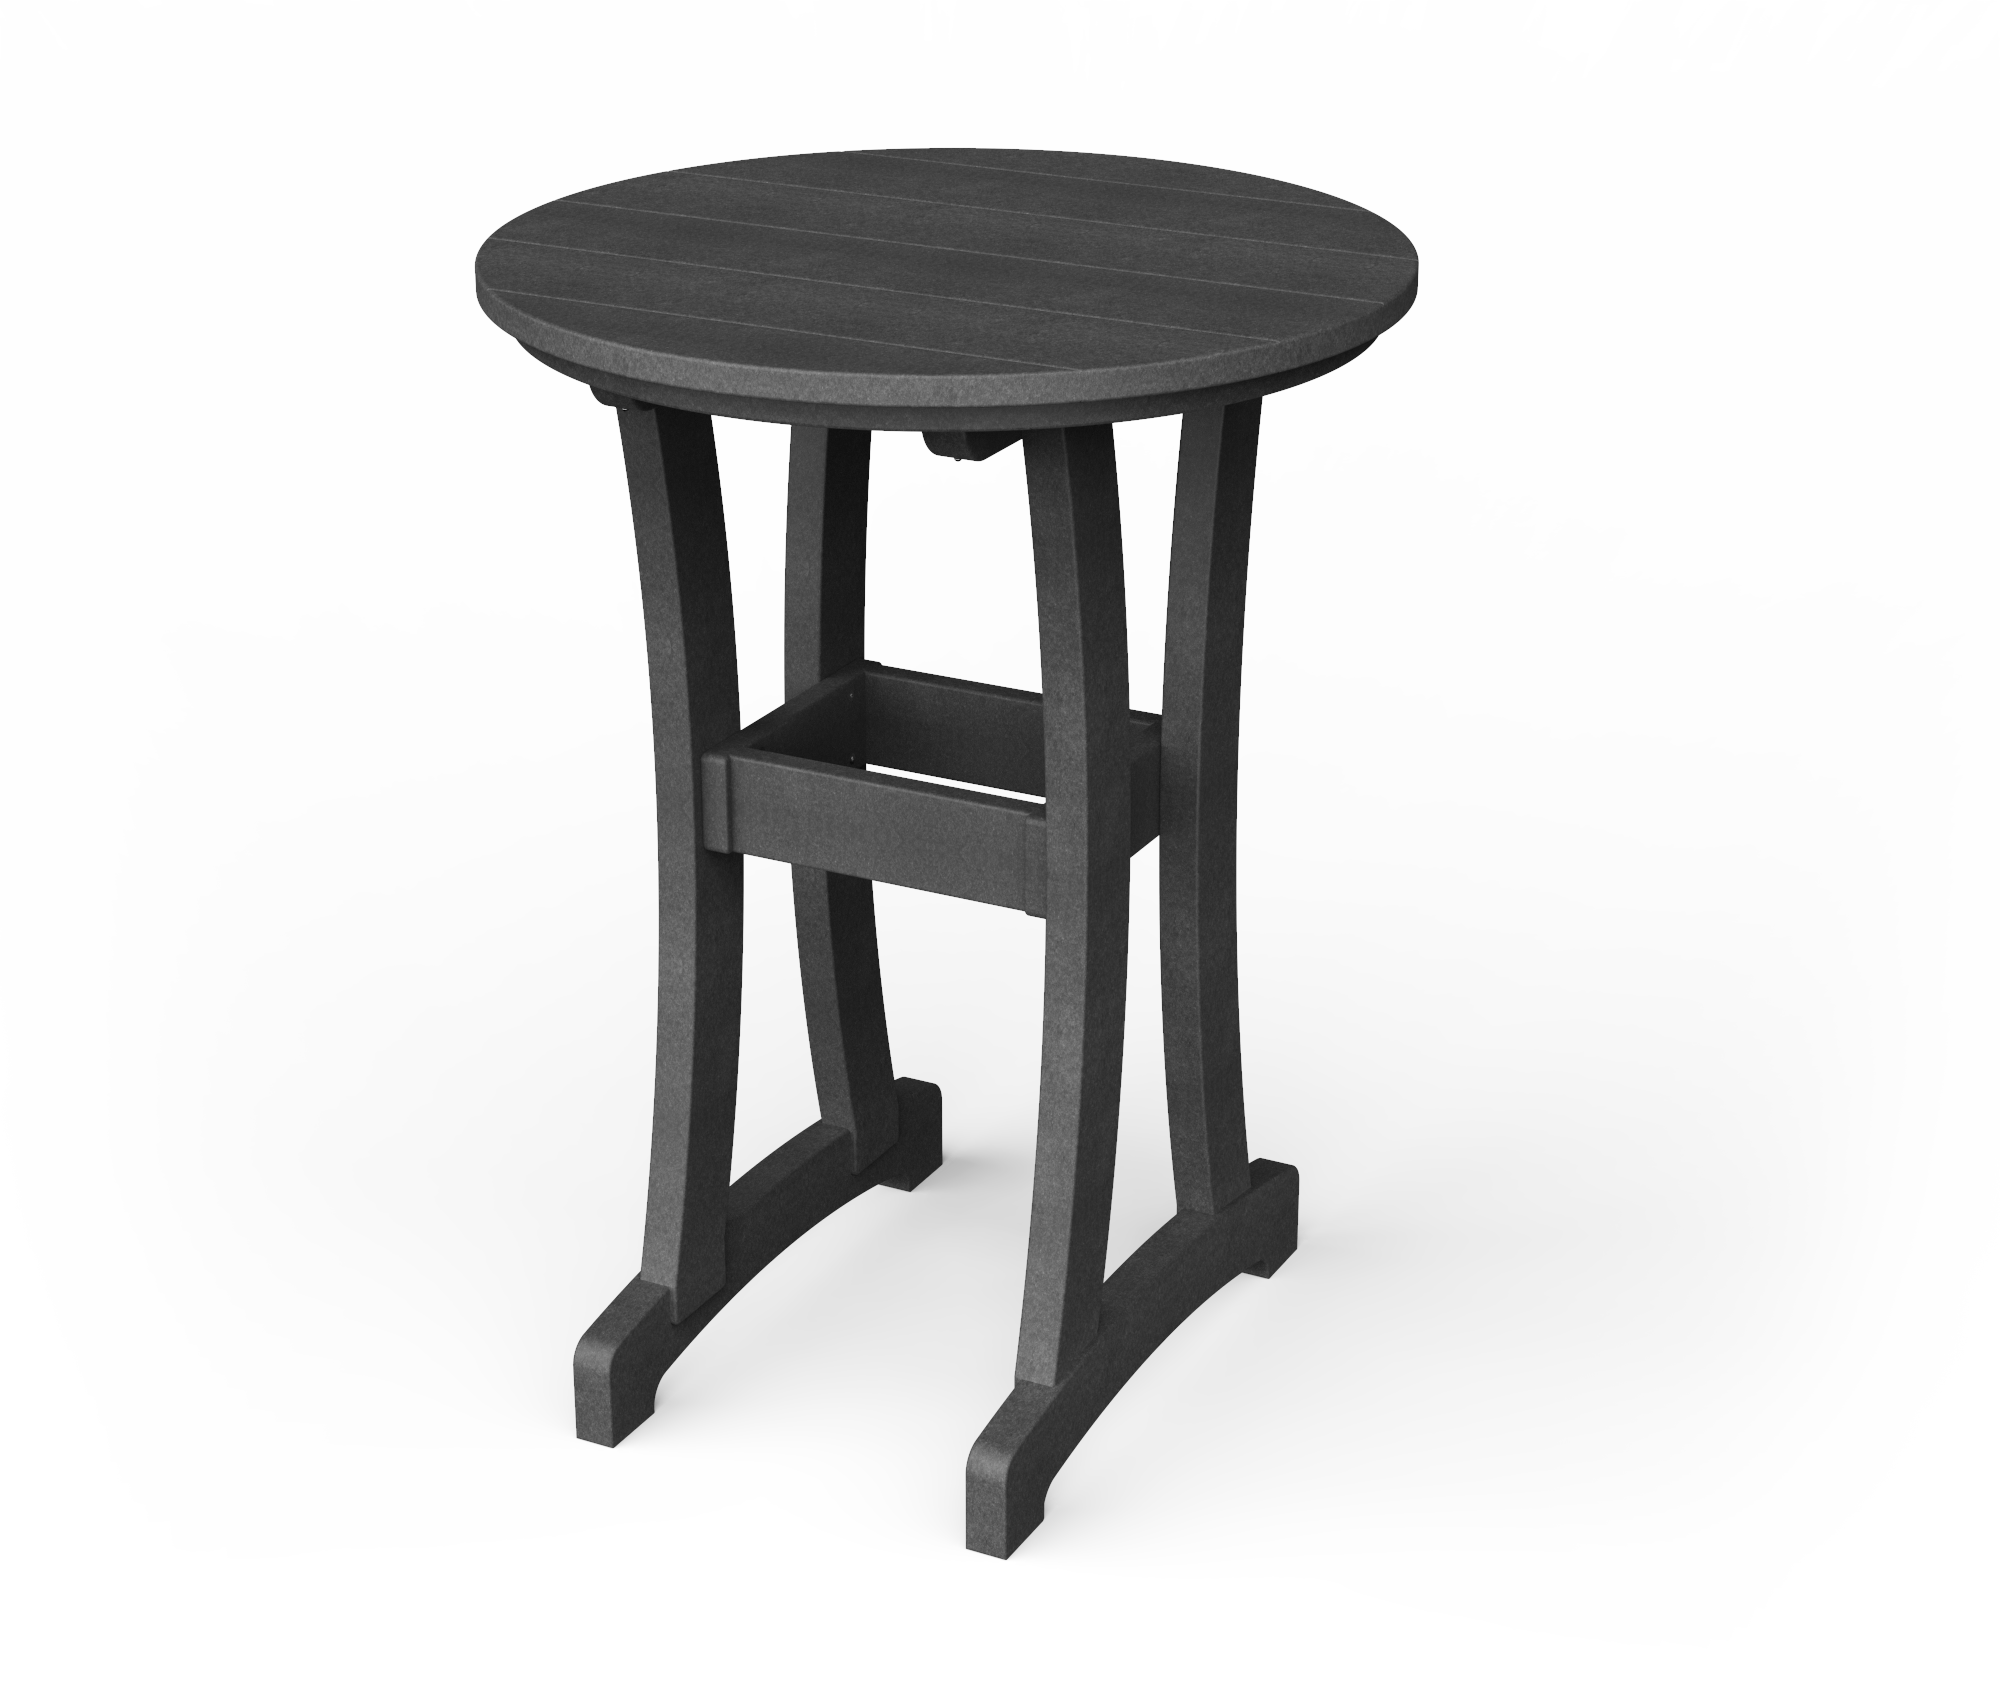 Poly round bar table.